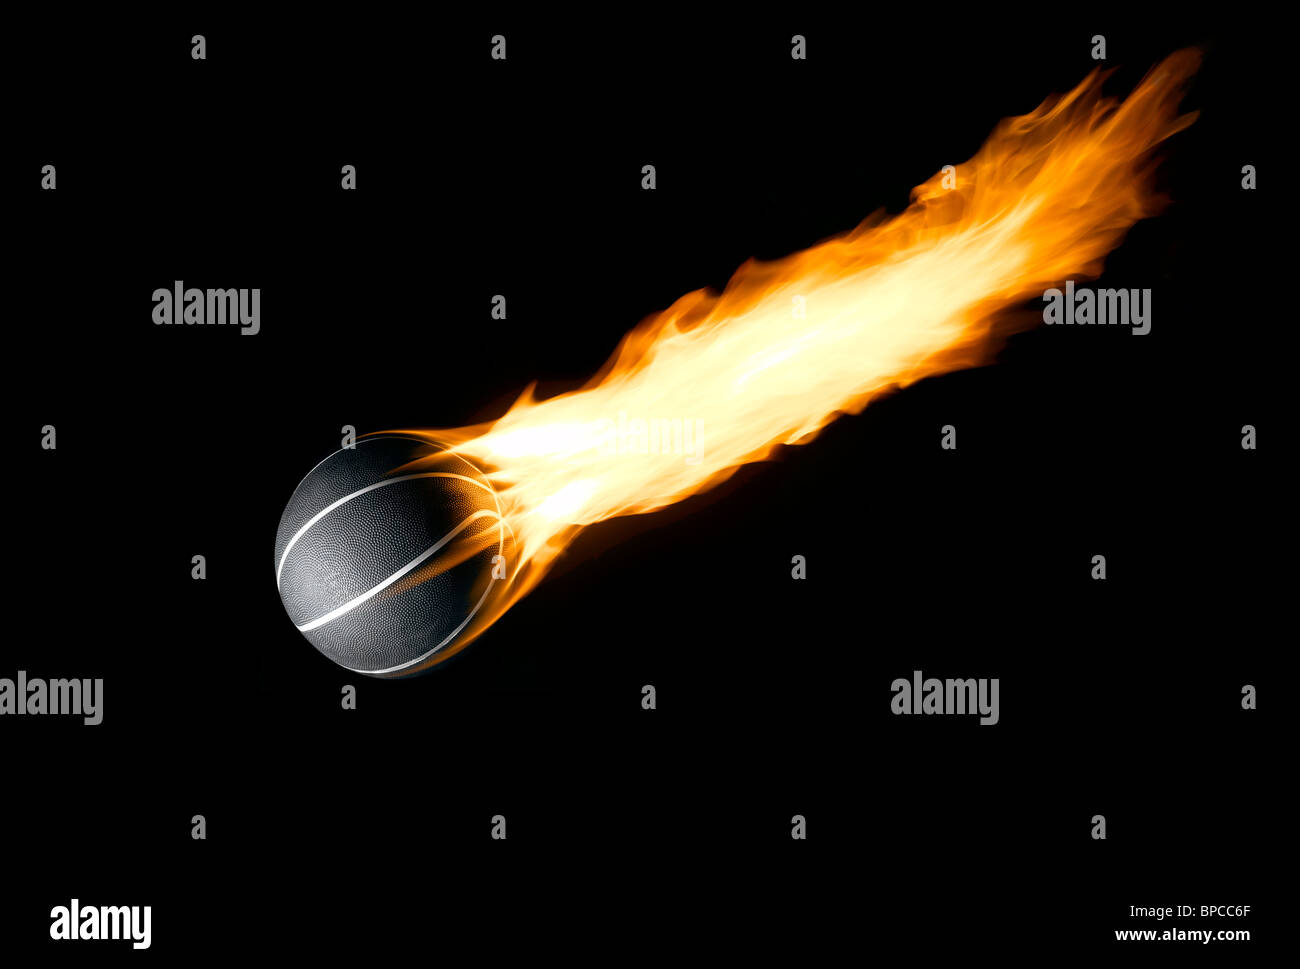 A Basketball with a burning tail like a comet Stock Photo